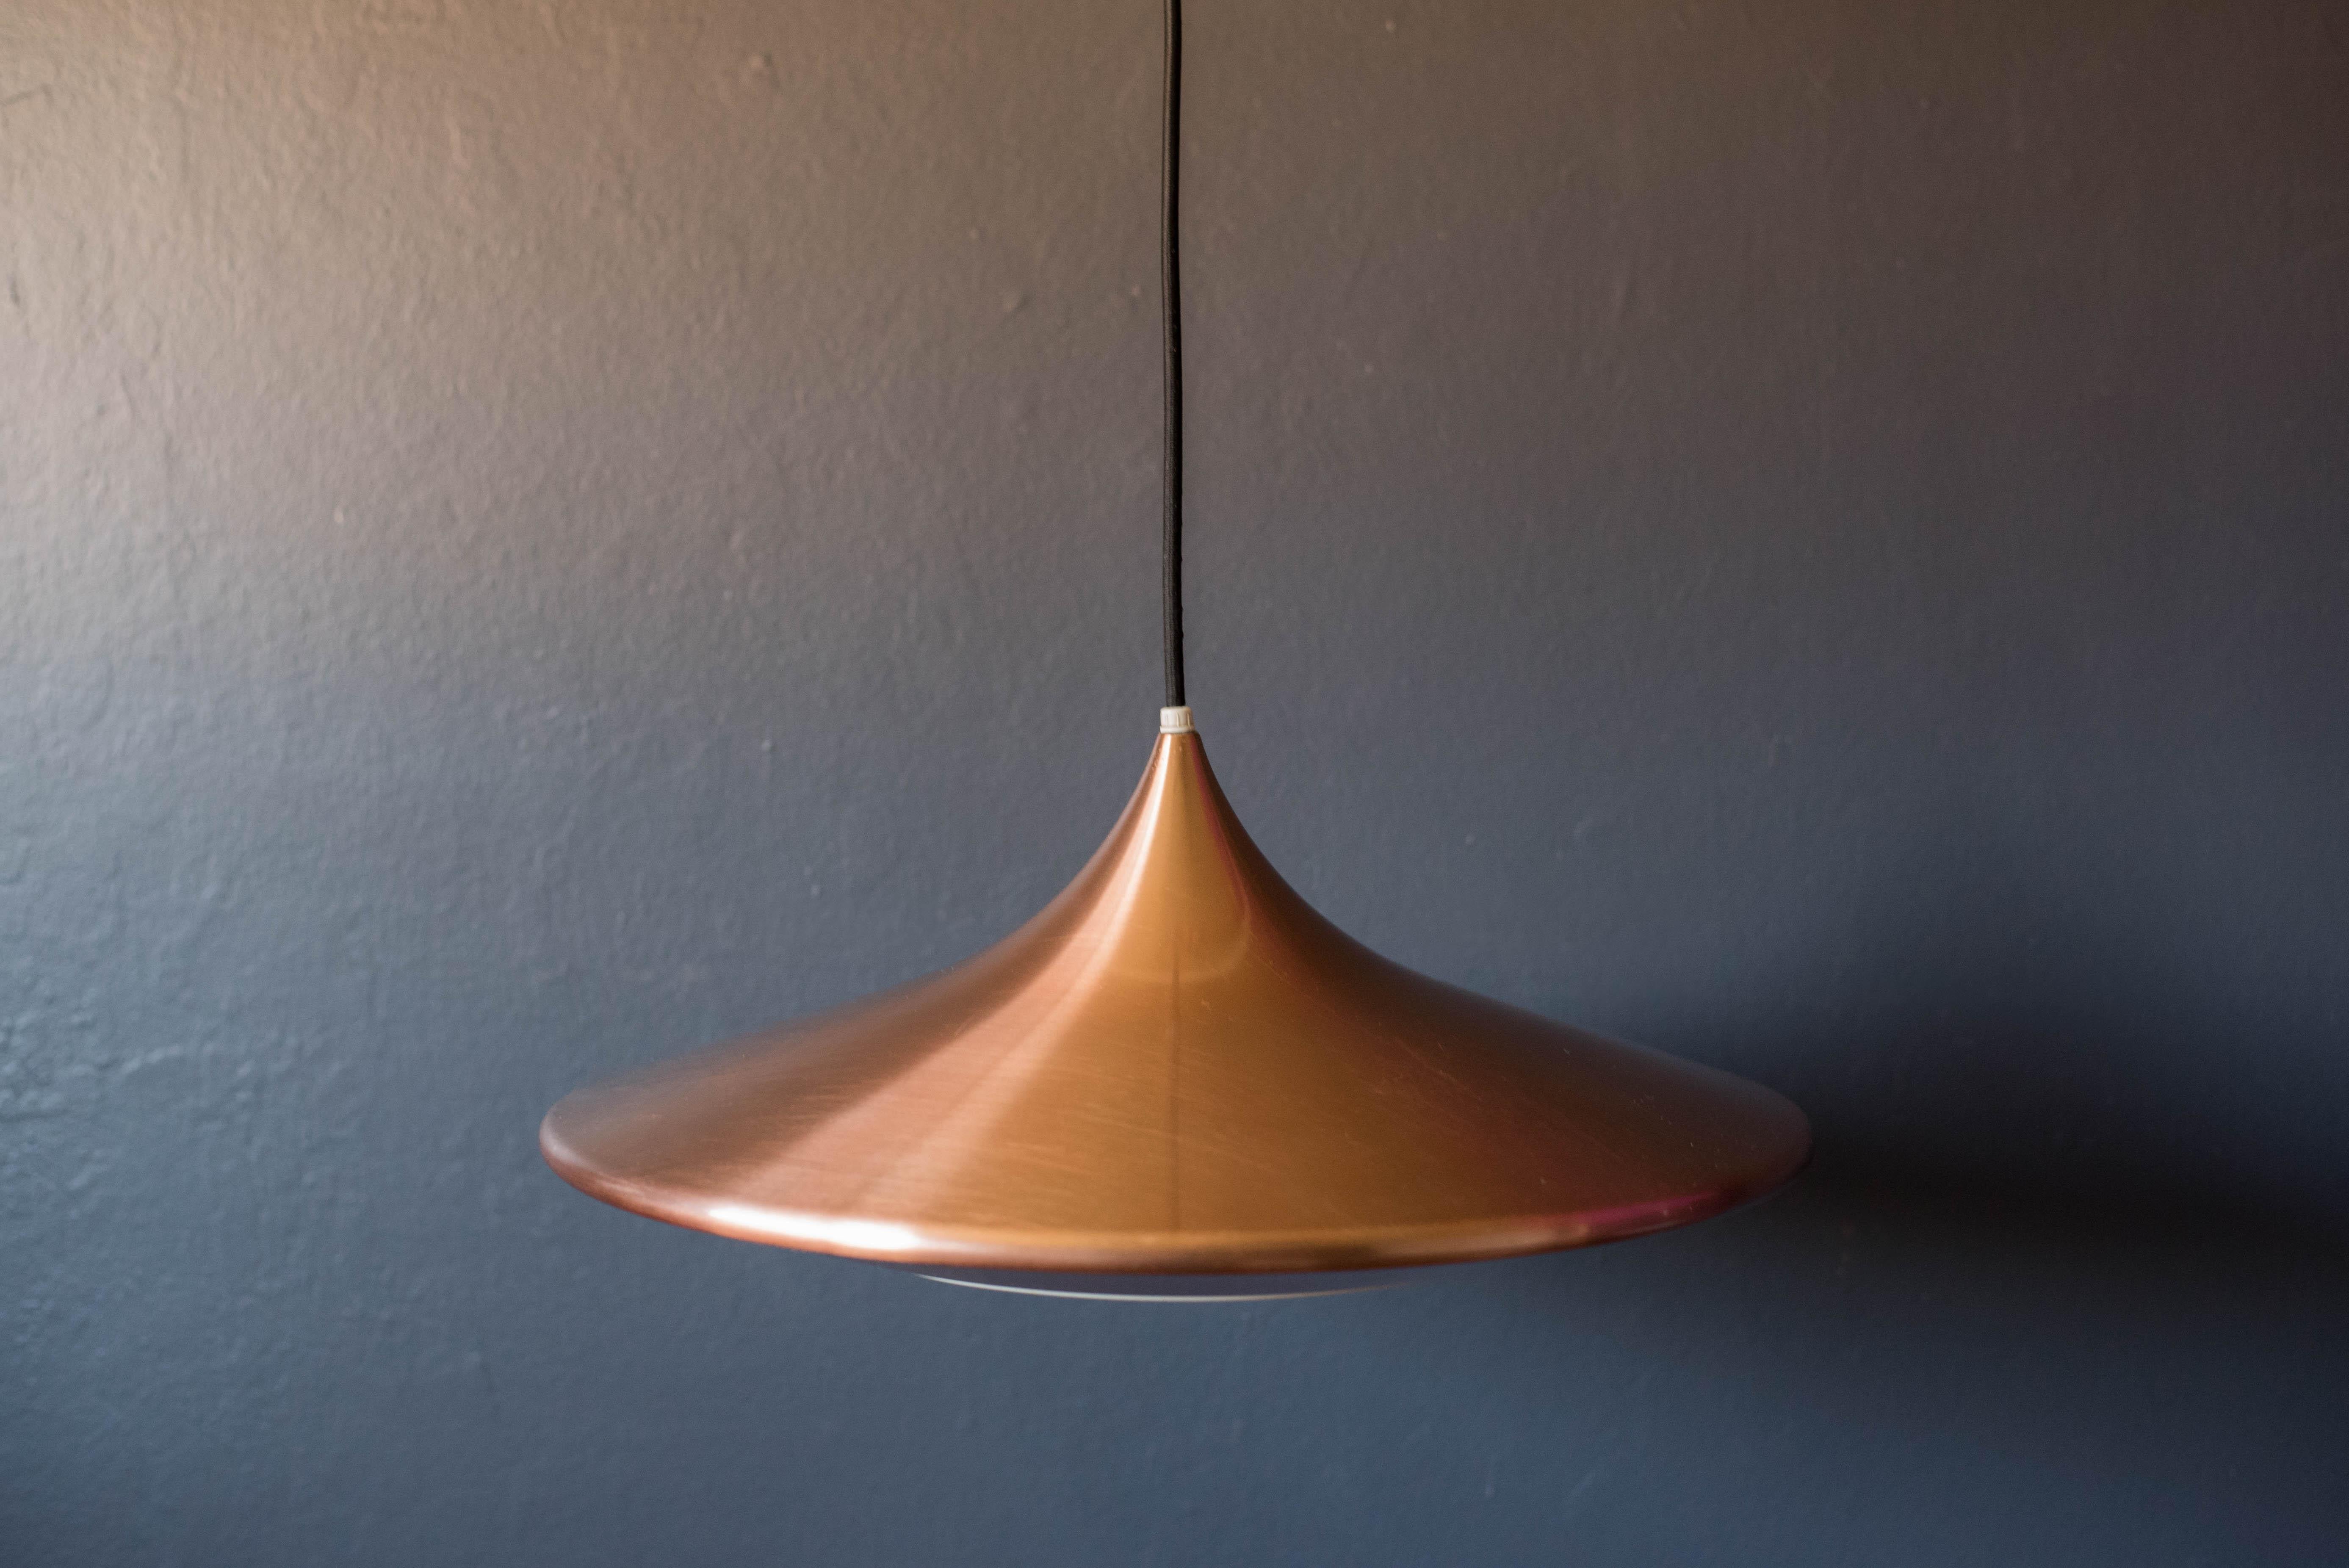 Mid-Century Modern hanging saucer pendant lamp c. 1960's. This sculptural piece has a shiny copper plated finish and includes a white bakelite diffuser. 

Black cord: 60